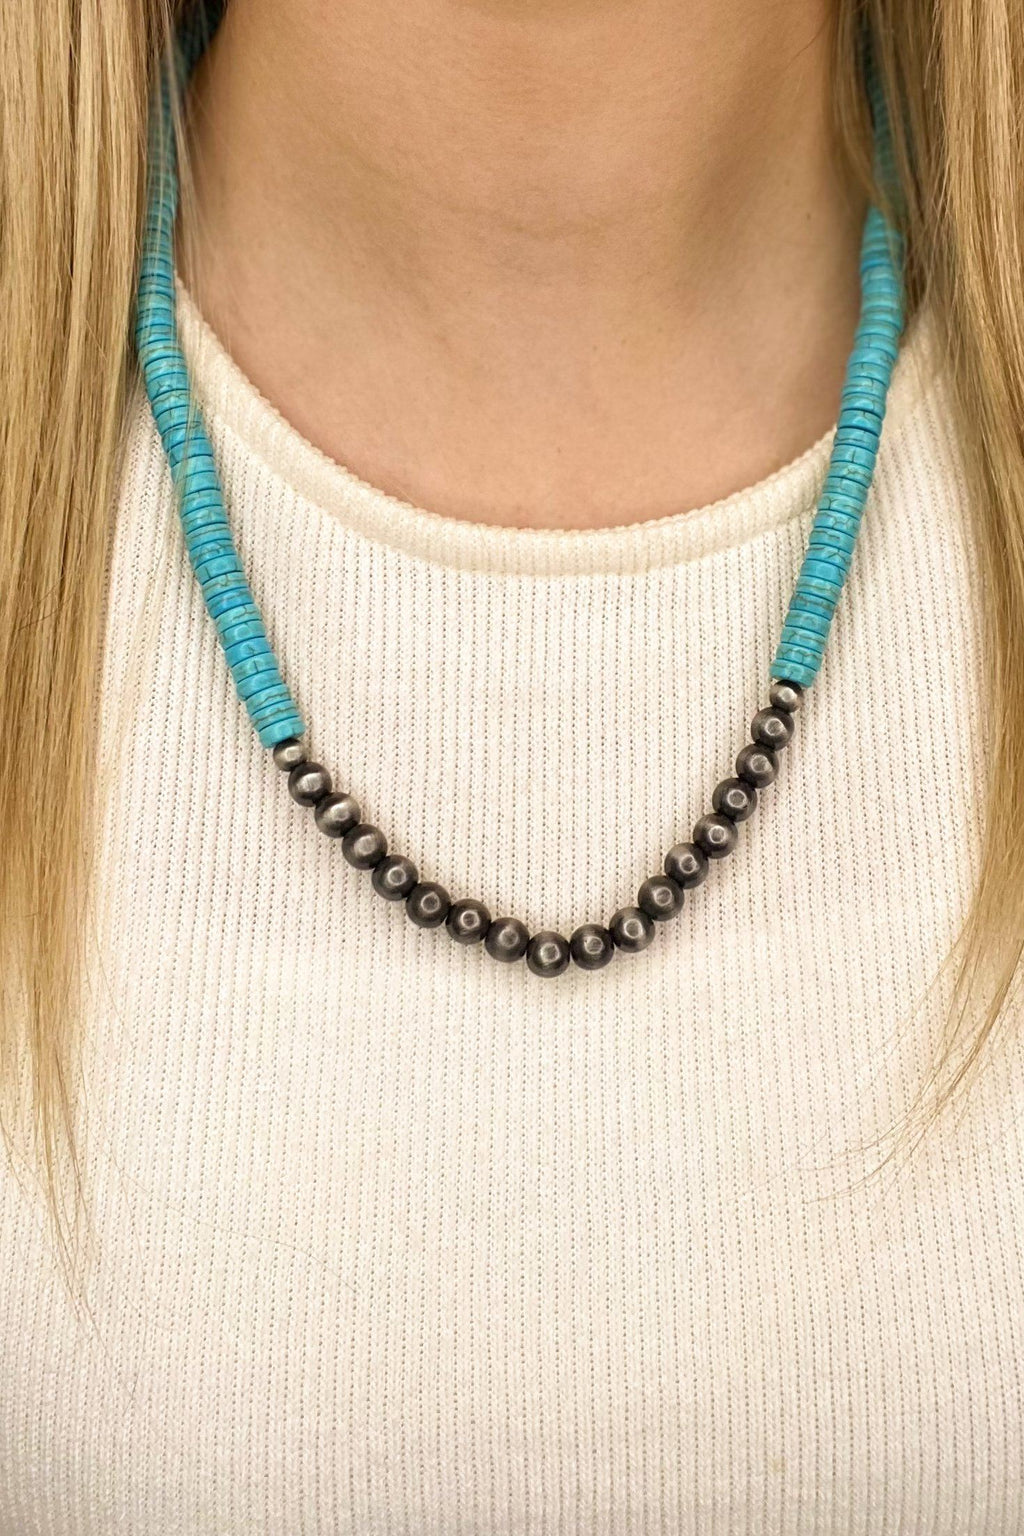 Turquoise Rondel Necklace with Navajo Pearl Center